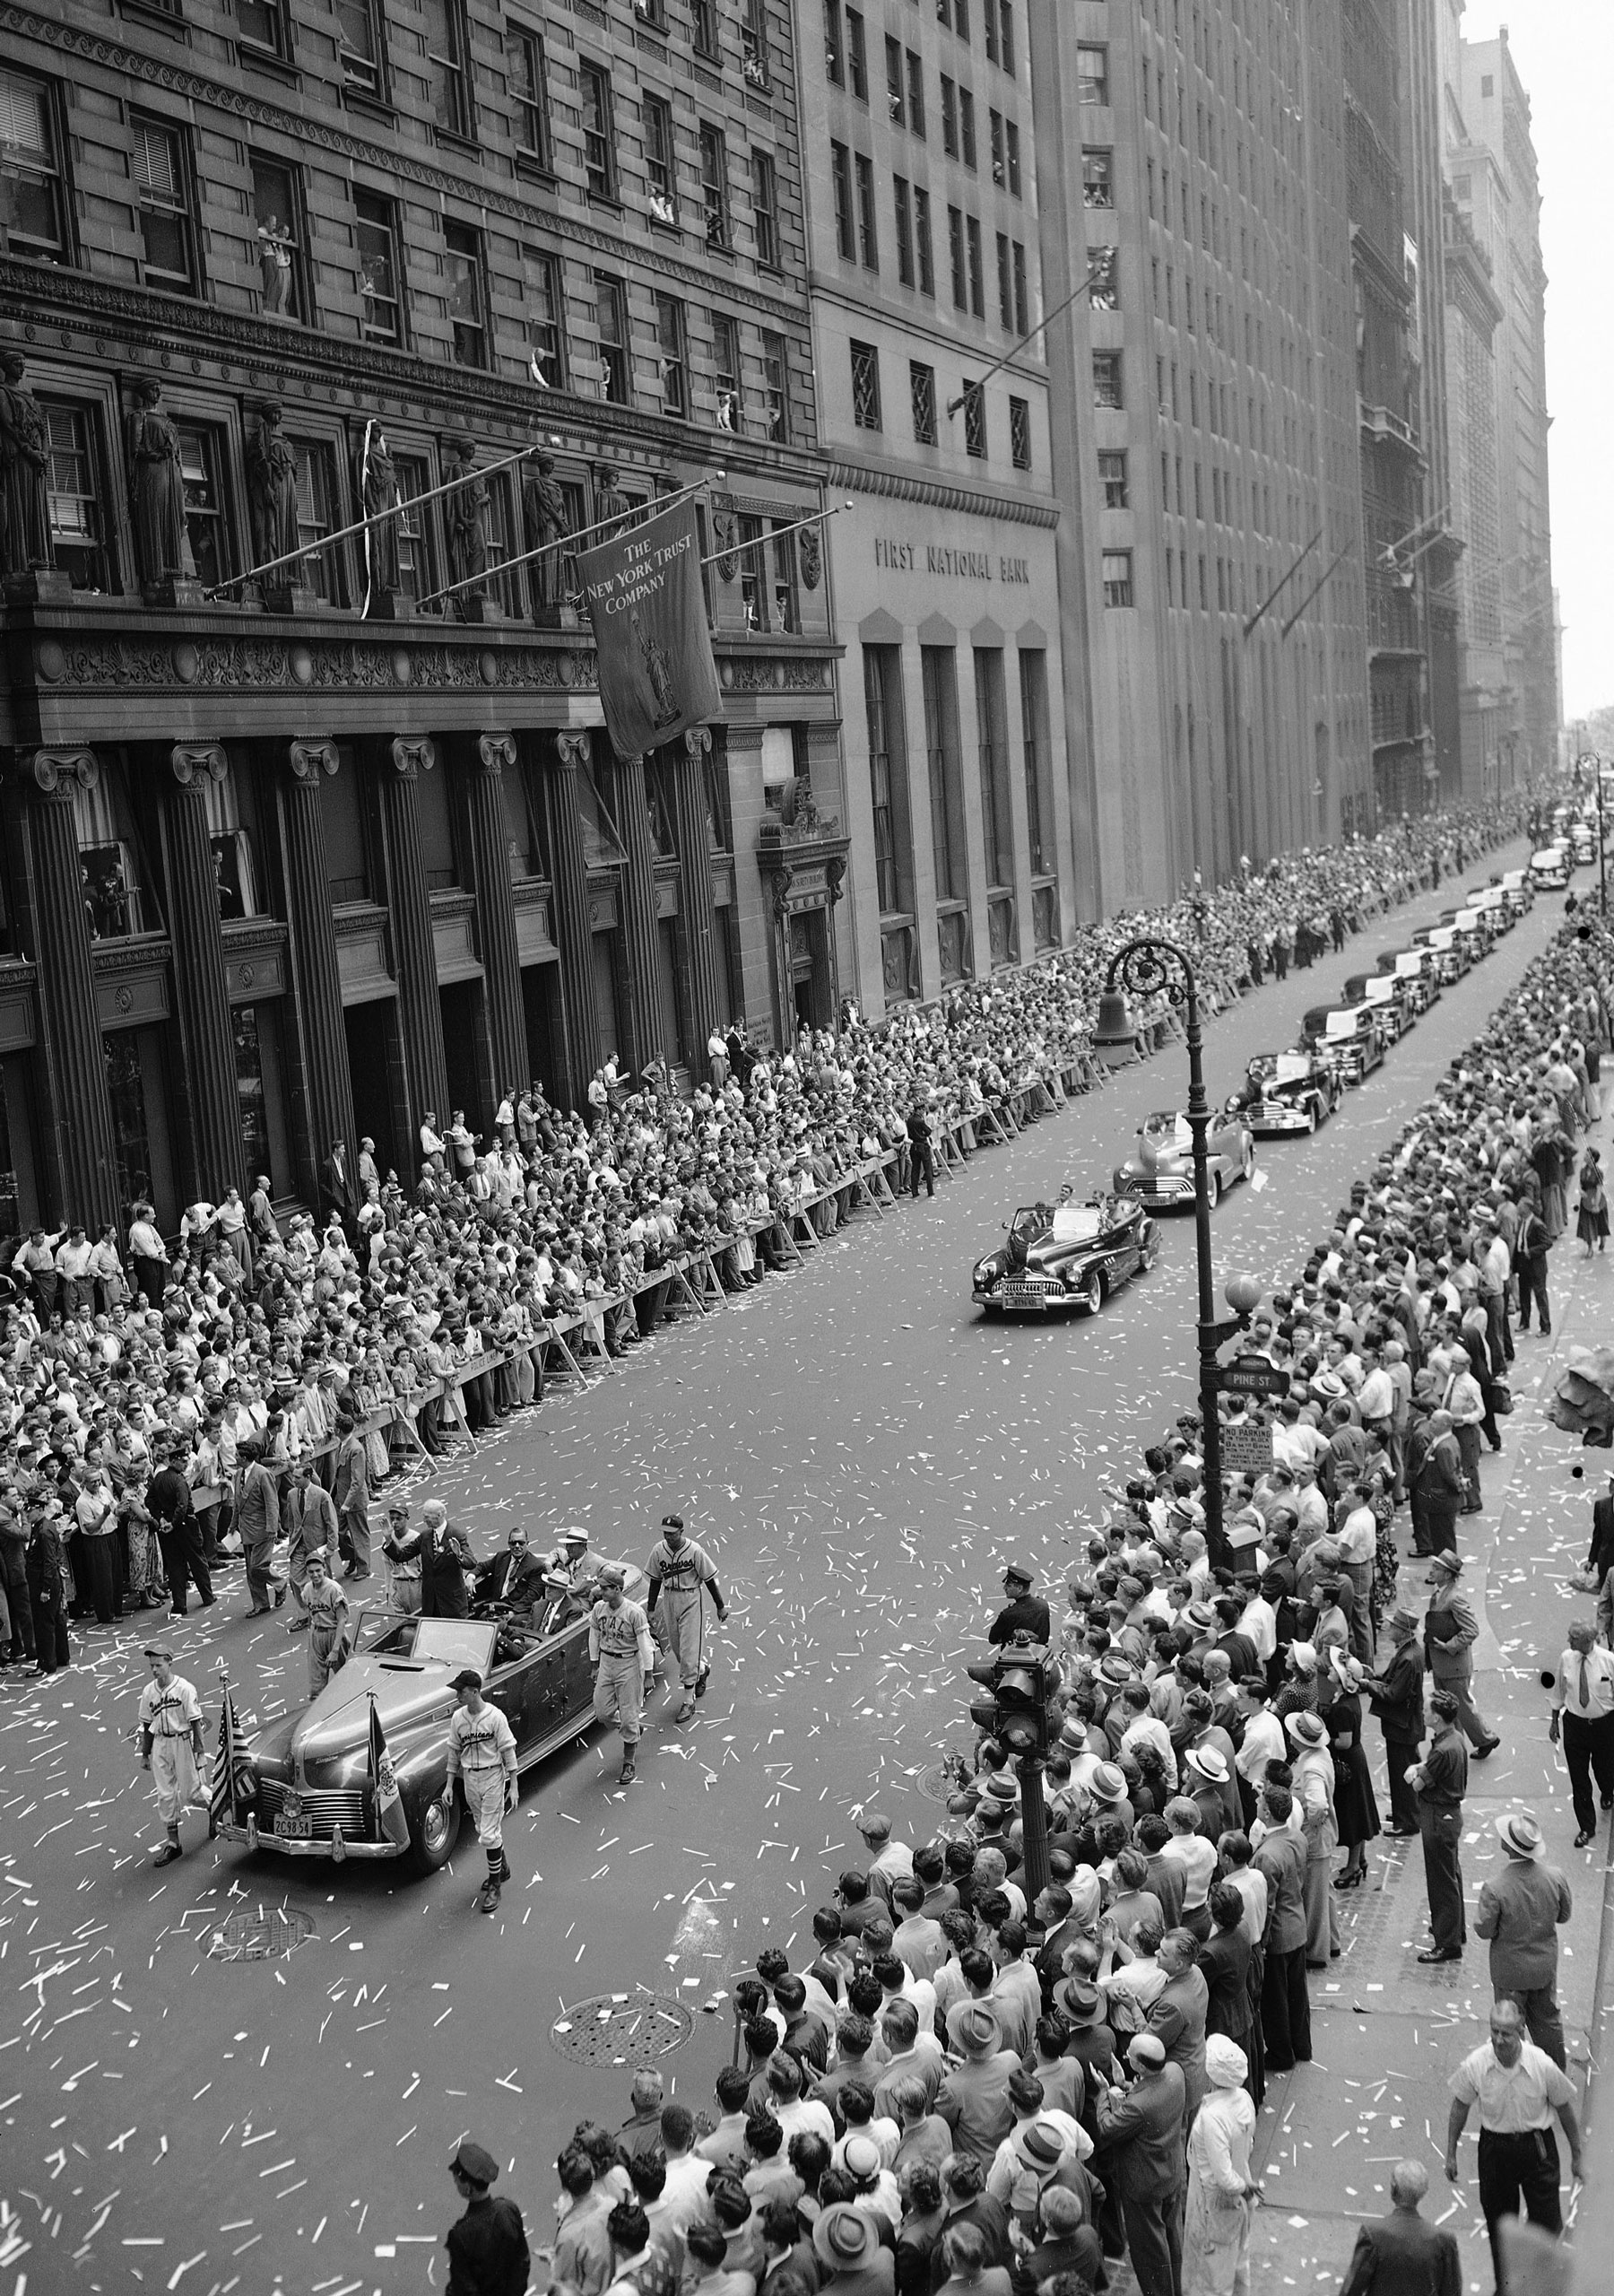 Baseball's grand old man, Connie Mack, stands up in a car, lower left, to acknowledge the cheers of New Yorkers lining lower Broadway, New York City, as a parade held in his honor moves past Pine Street towards City Hall and an official welcome, Aug. 19, 1949. Seated in the car with him are Grover Whalen, chairman of the mayor's reception committee; Del Webb, co-owner of the Yankees; and Edward G. Barrow, former Yankees executive. In following car are Yankee players Joe DiMaggio and his young son Joe Jr., Charlie Silvera, Joe Page and Johnny Lindell. (AP Photo)